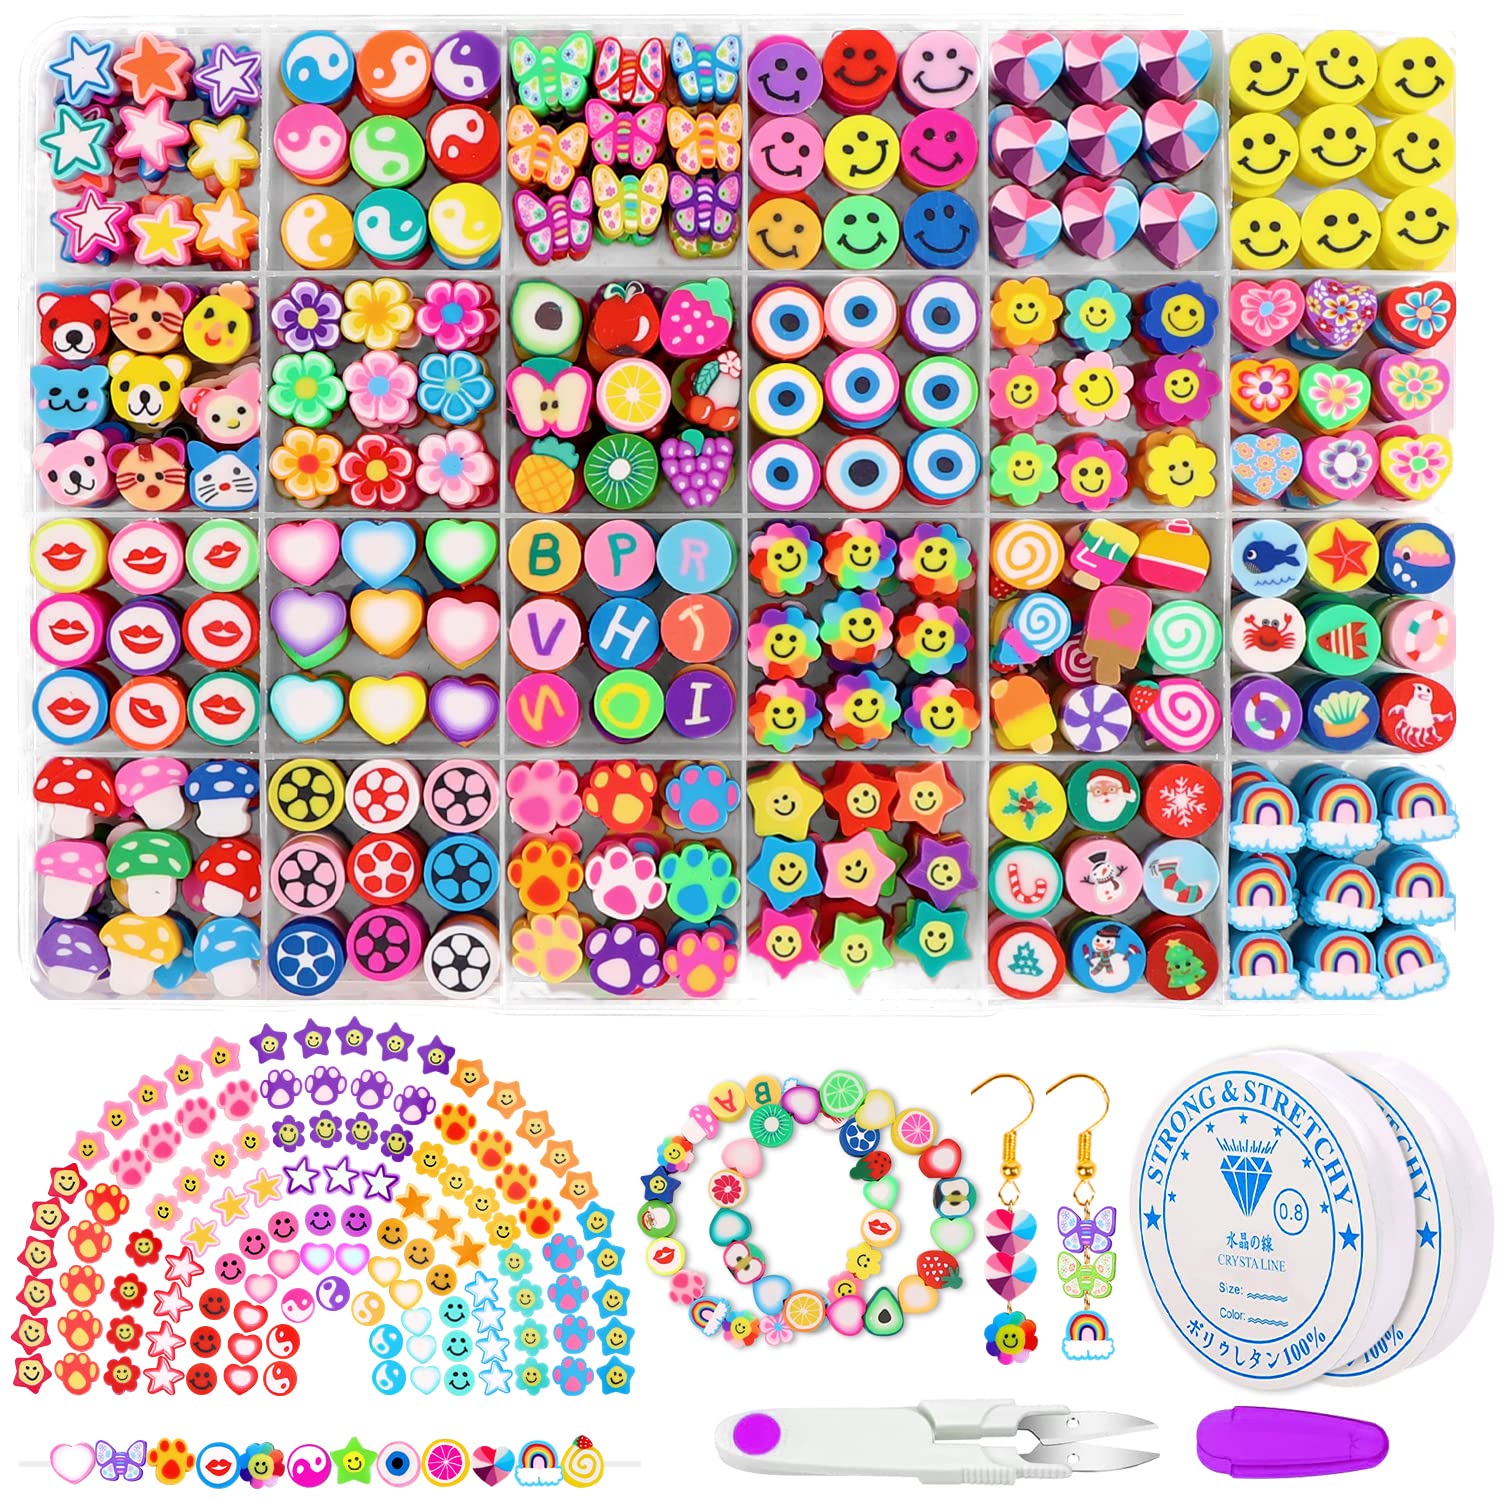 JOICEE 480PCS Fruit Flower Polymer Clay Beads, 24 Style Cute